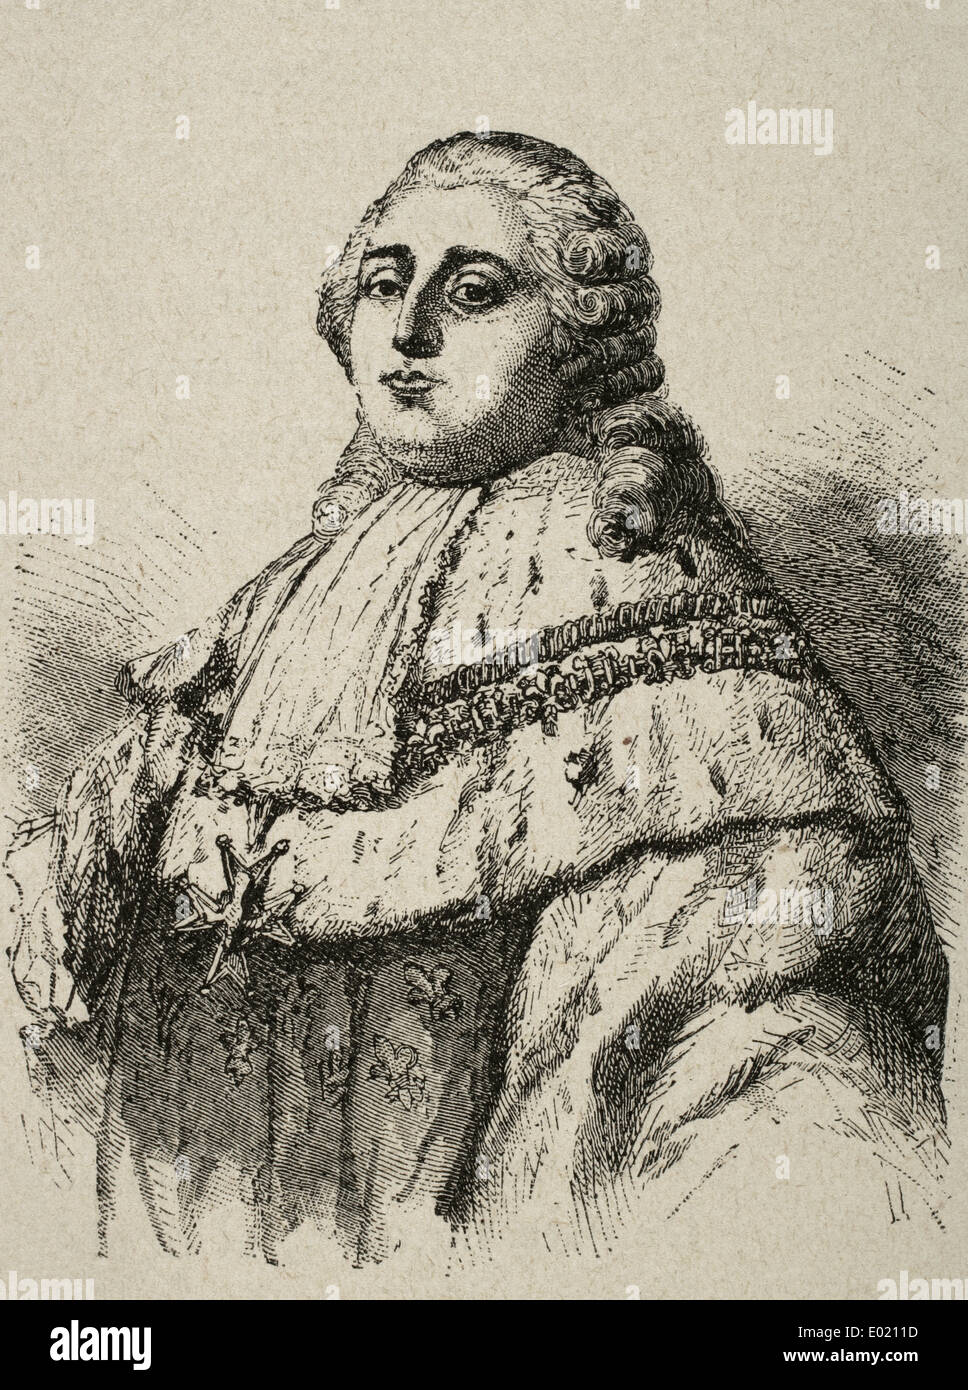 Louis XVI (1754-1793). King of France. Engraving in Universal History, M. Verges, 1917. Stock Photo